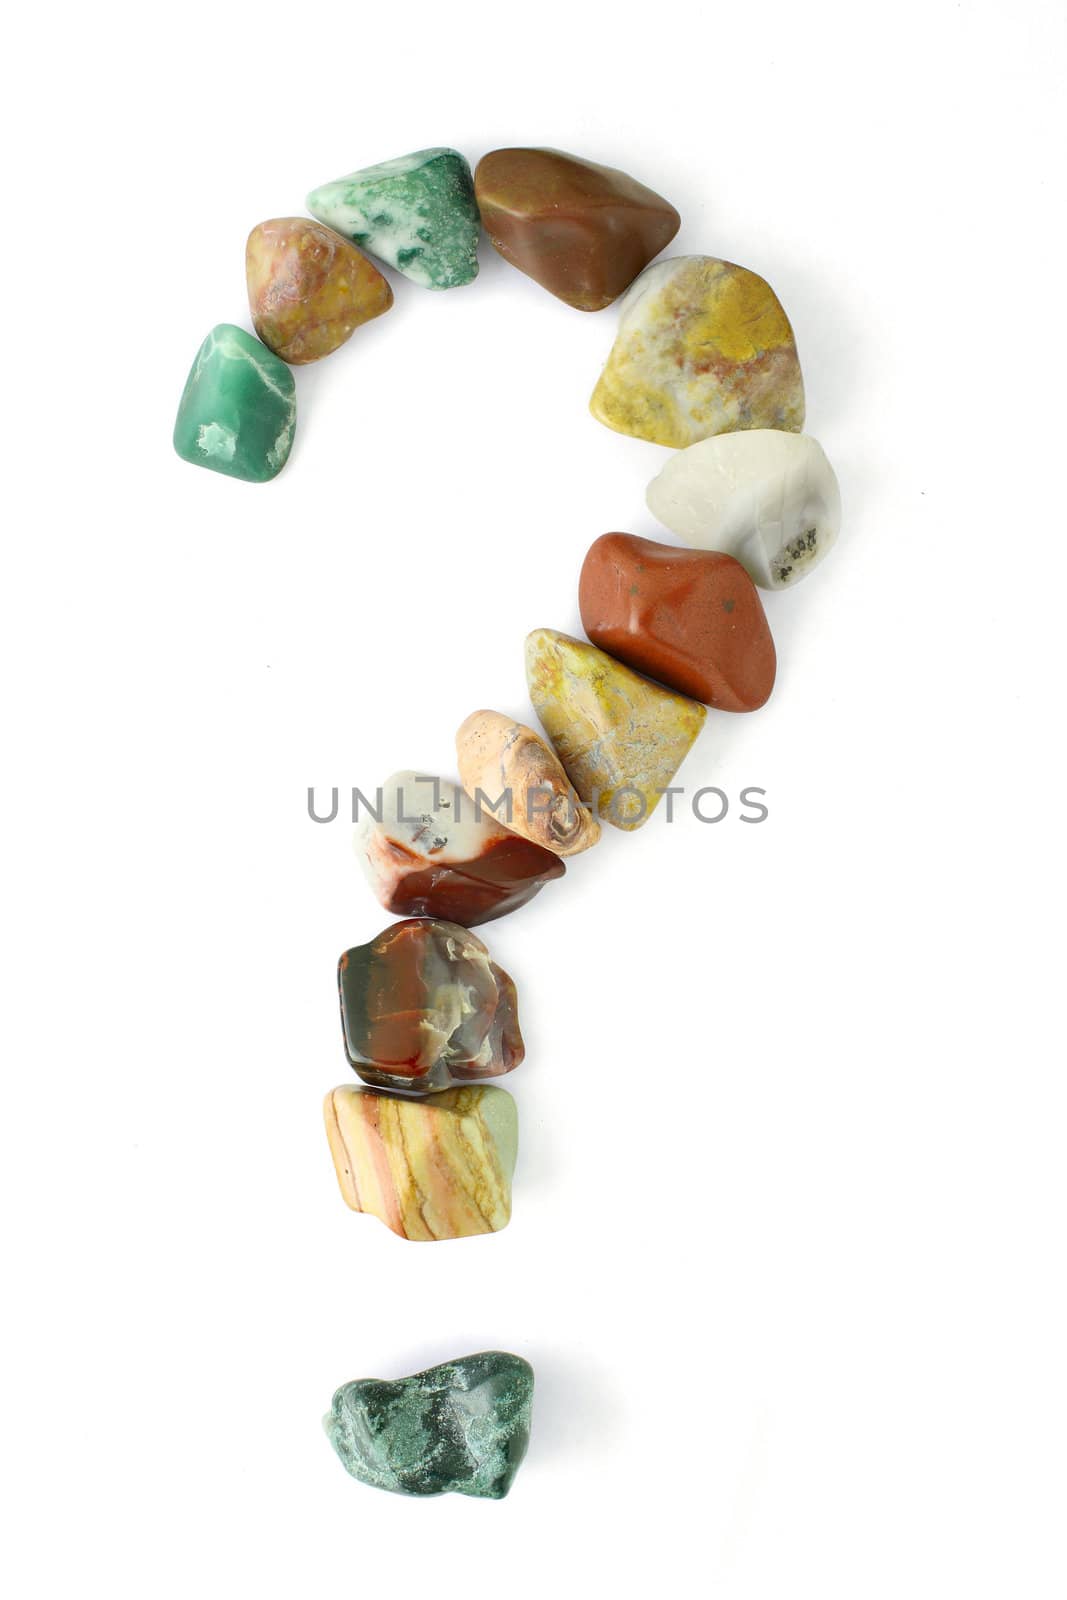 Polished Stones Question Mark by Em3